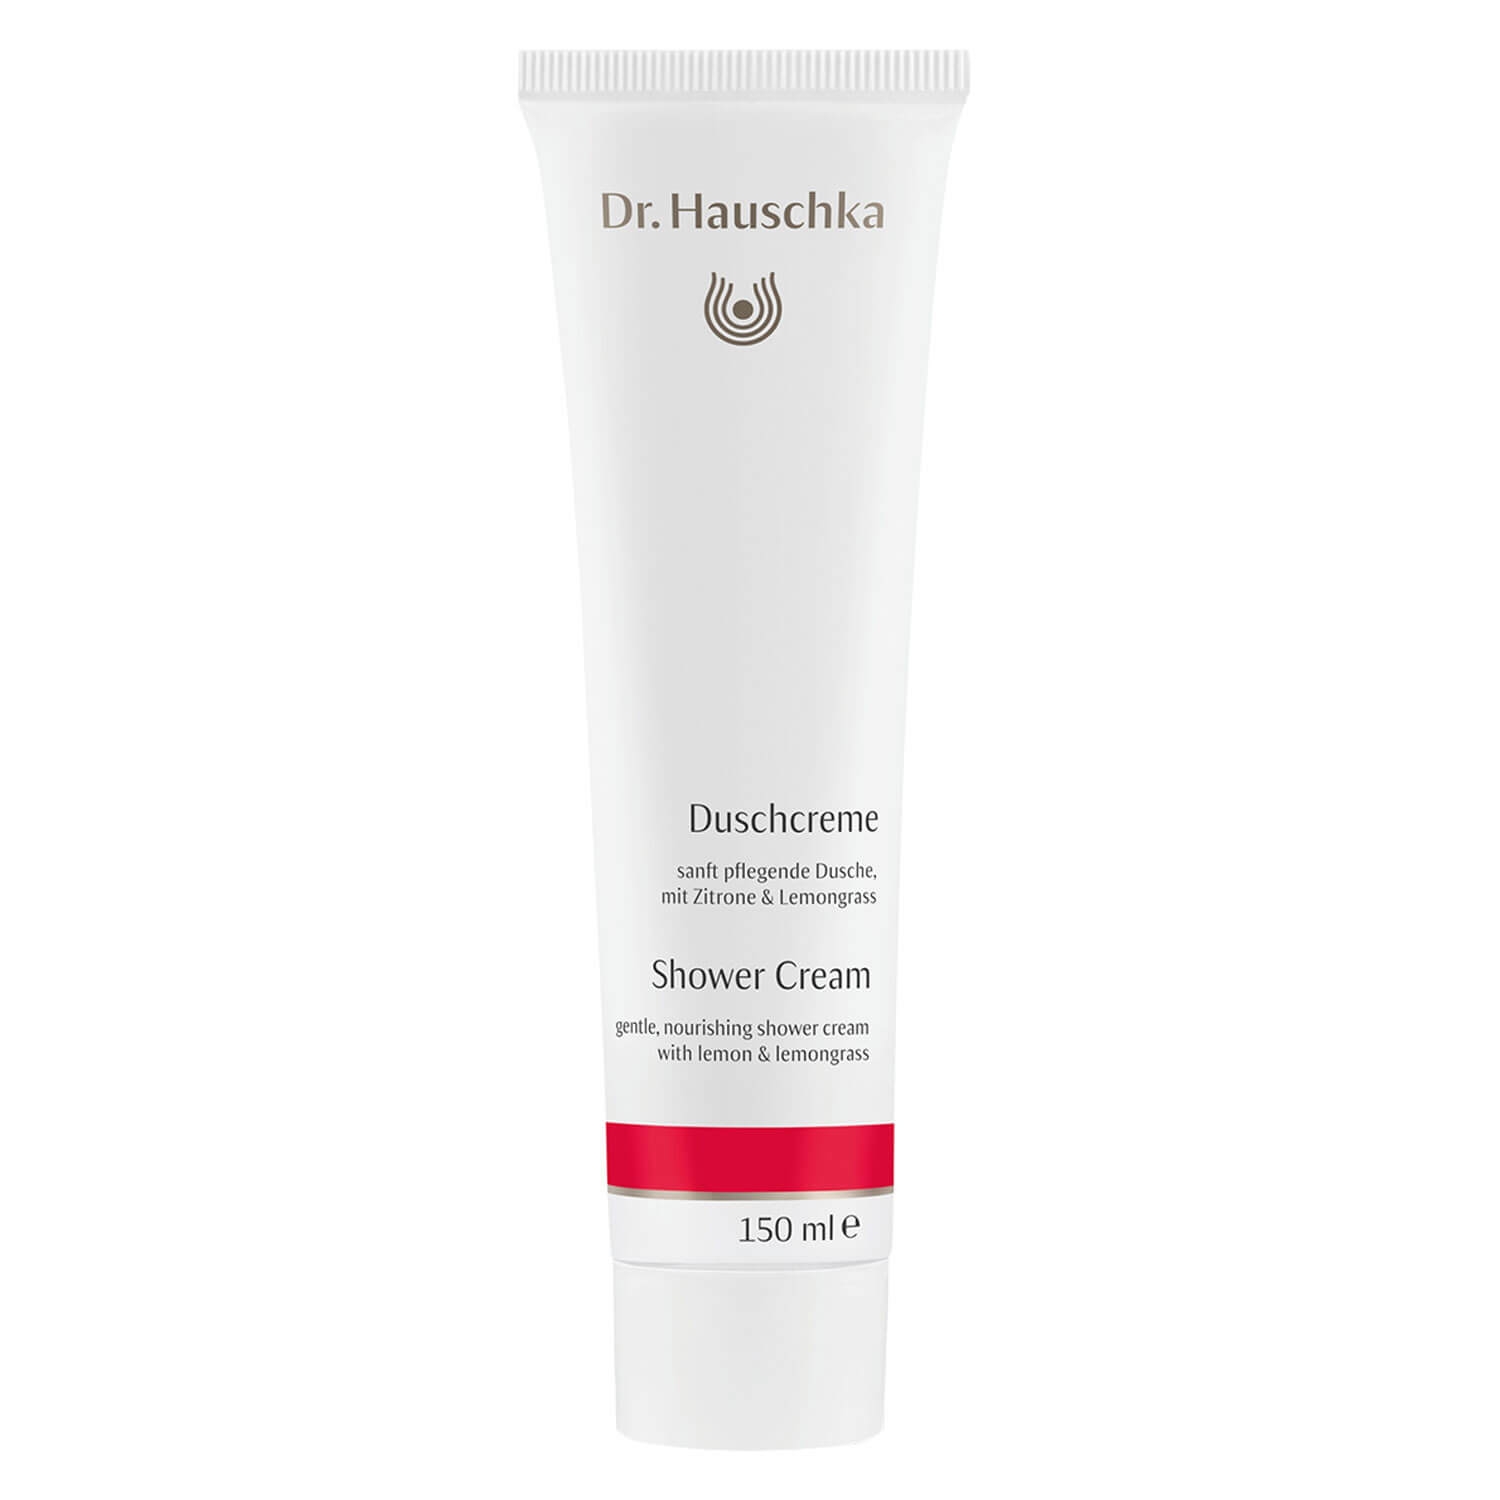 Product image from Dr. Hauschka - Duschcreme Zitrone & Lemongrass